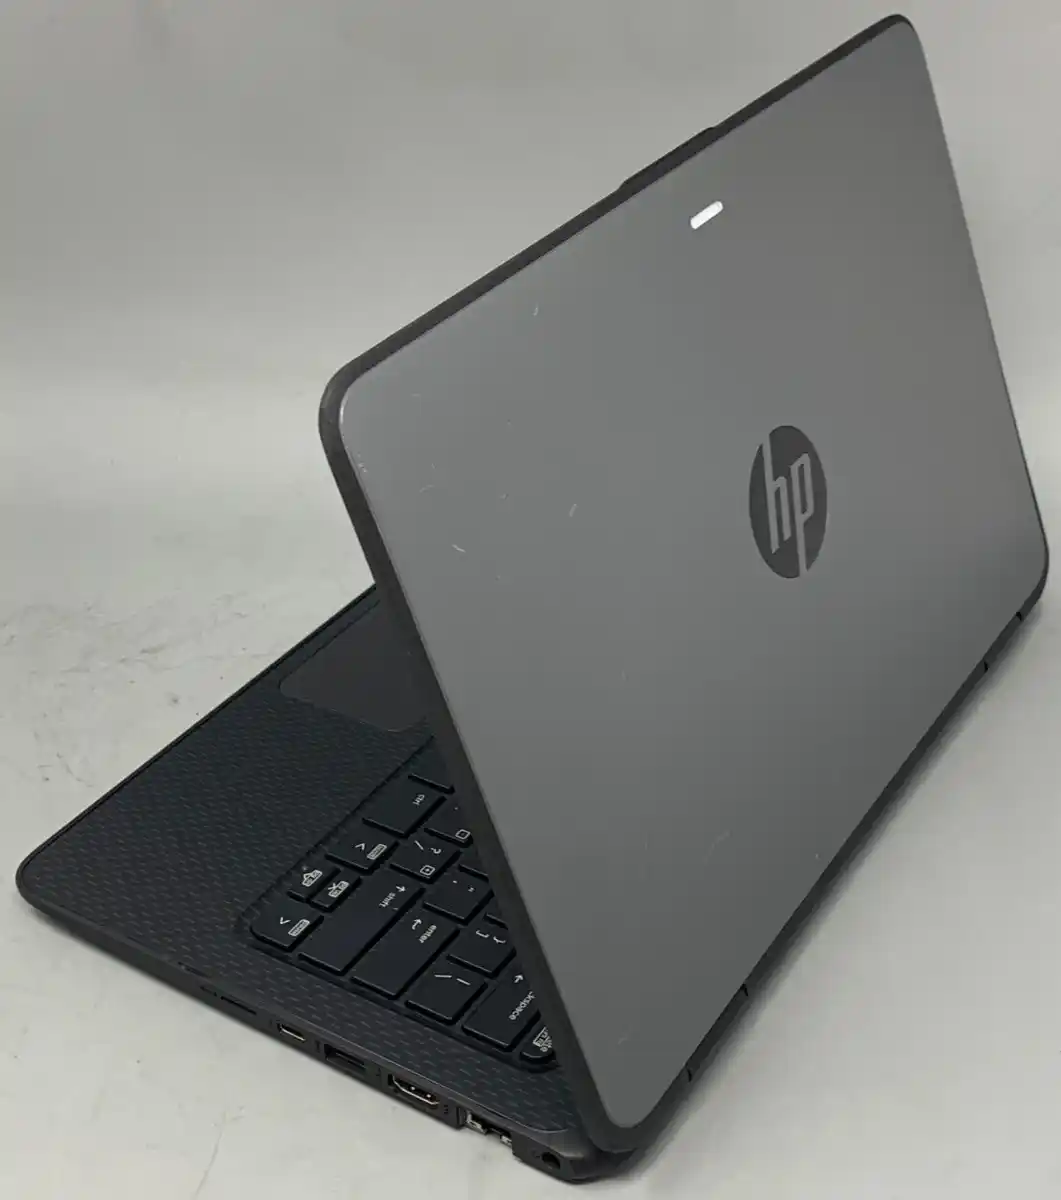 Hp 11G1Ee X360 Intel Ram 4Gb Ssd 128,Touch Screen/Yoga Speed 1.80Ghz Display Inch 11.6' Battery 2Hrs 